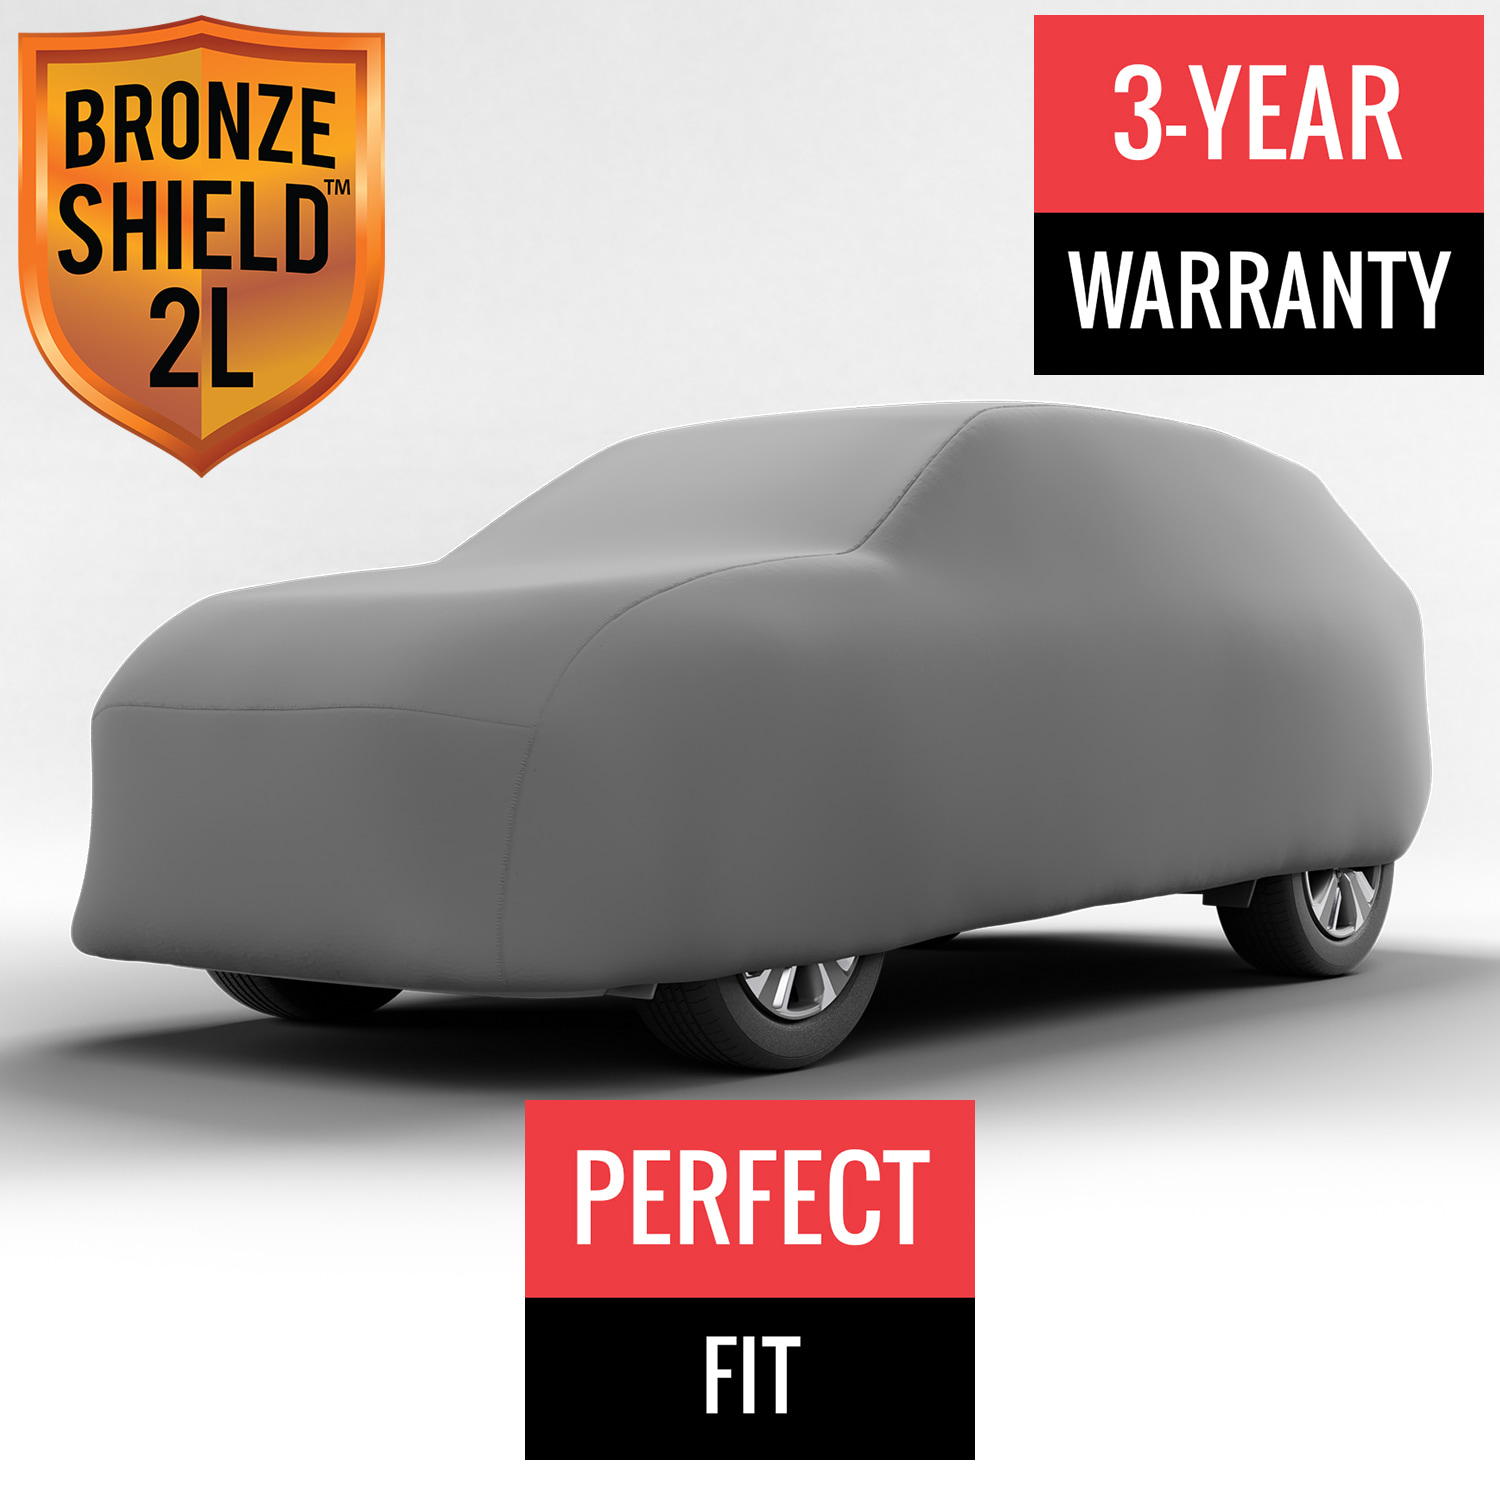 Bronze Shield 2L - Car Cover for Toyota Land Cruiser 1964 SUV 4-Door